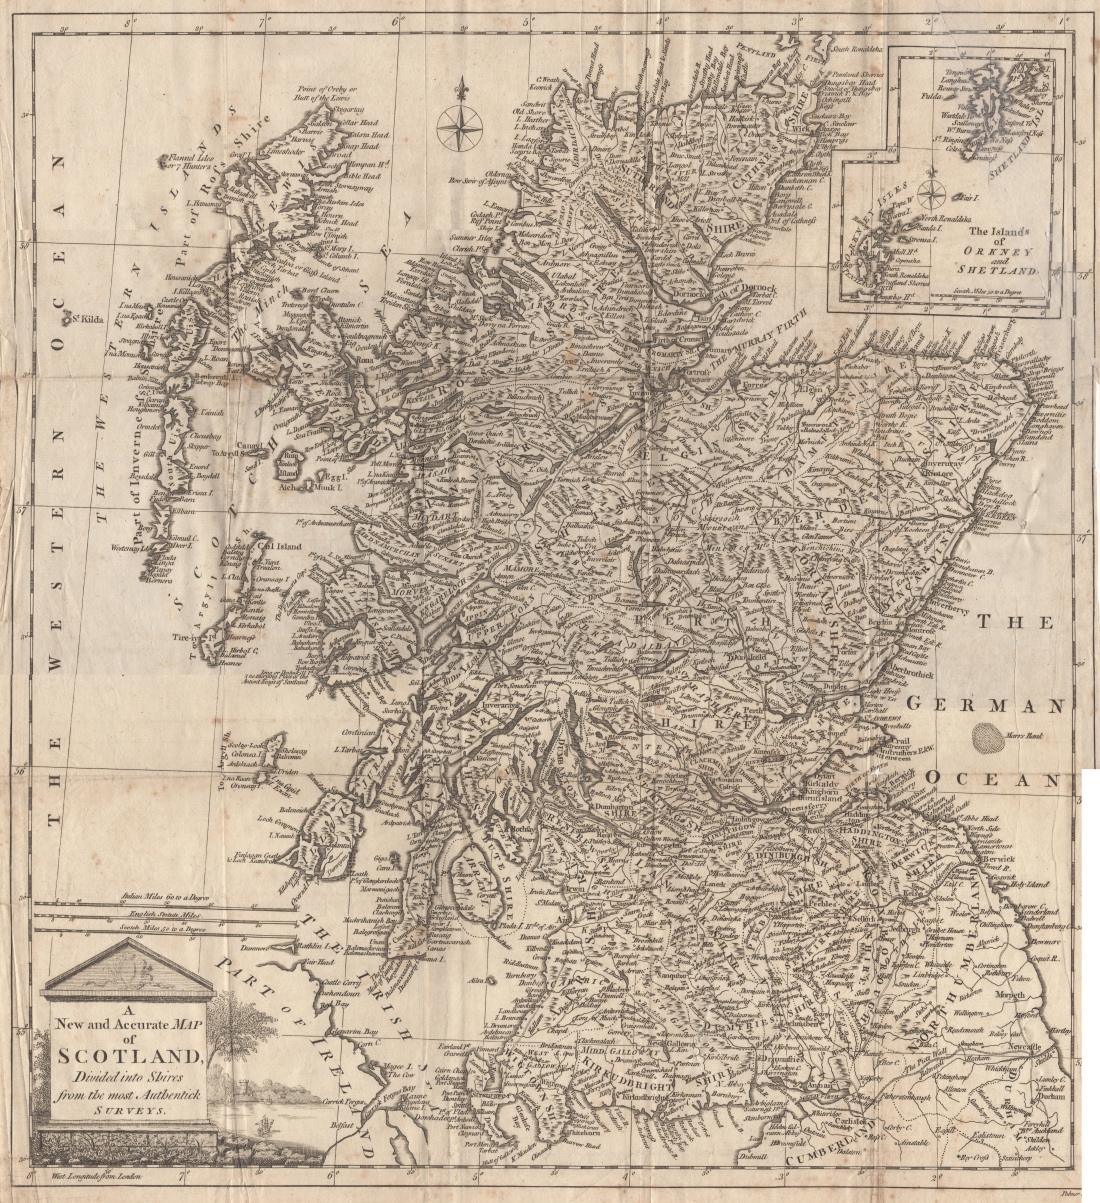 A General History of Scotland (1767)